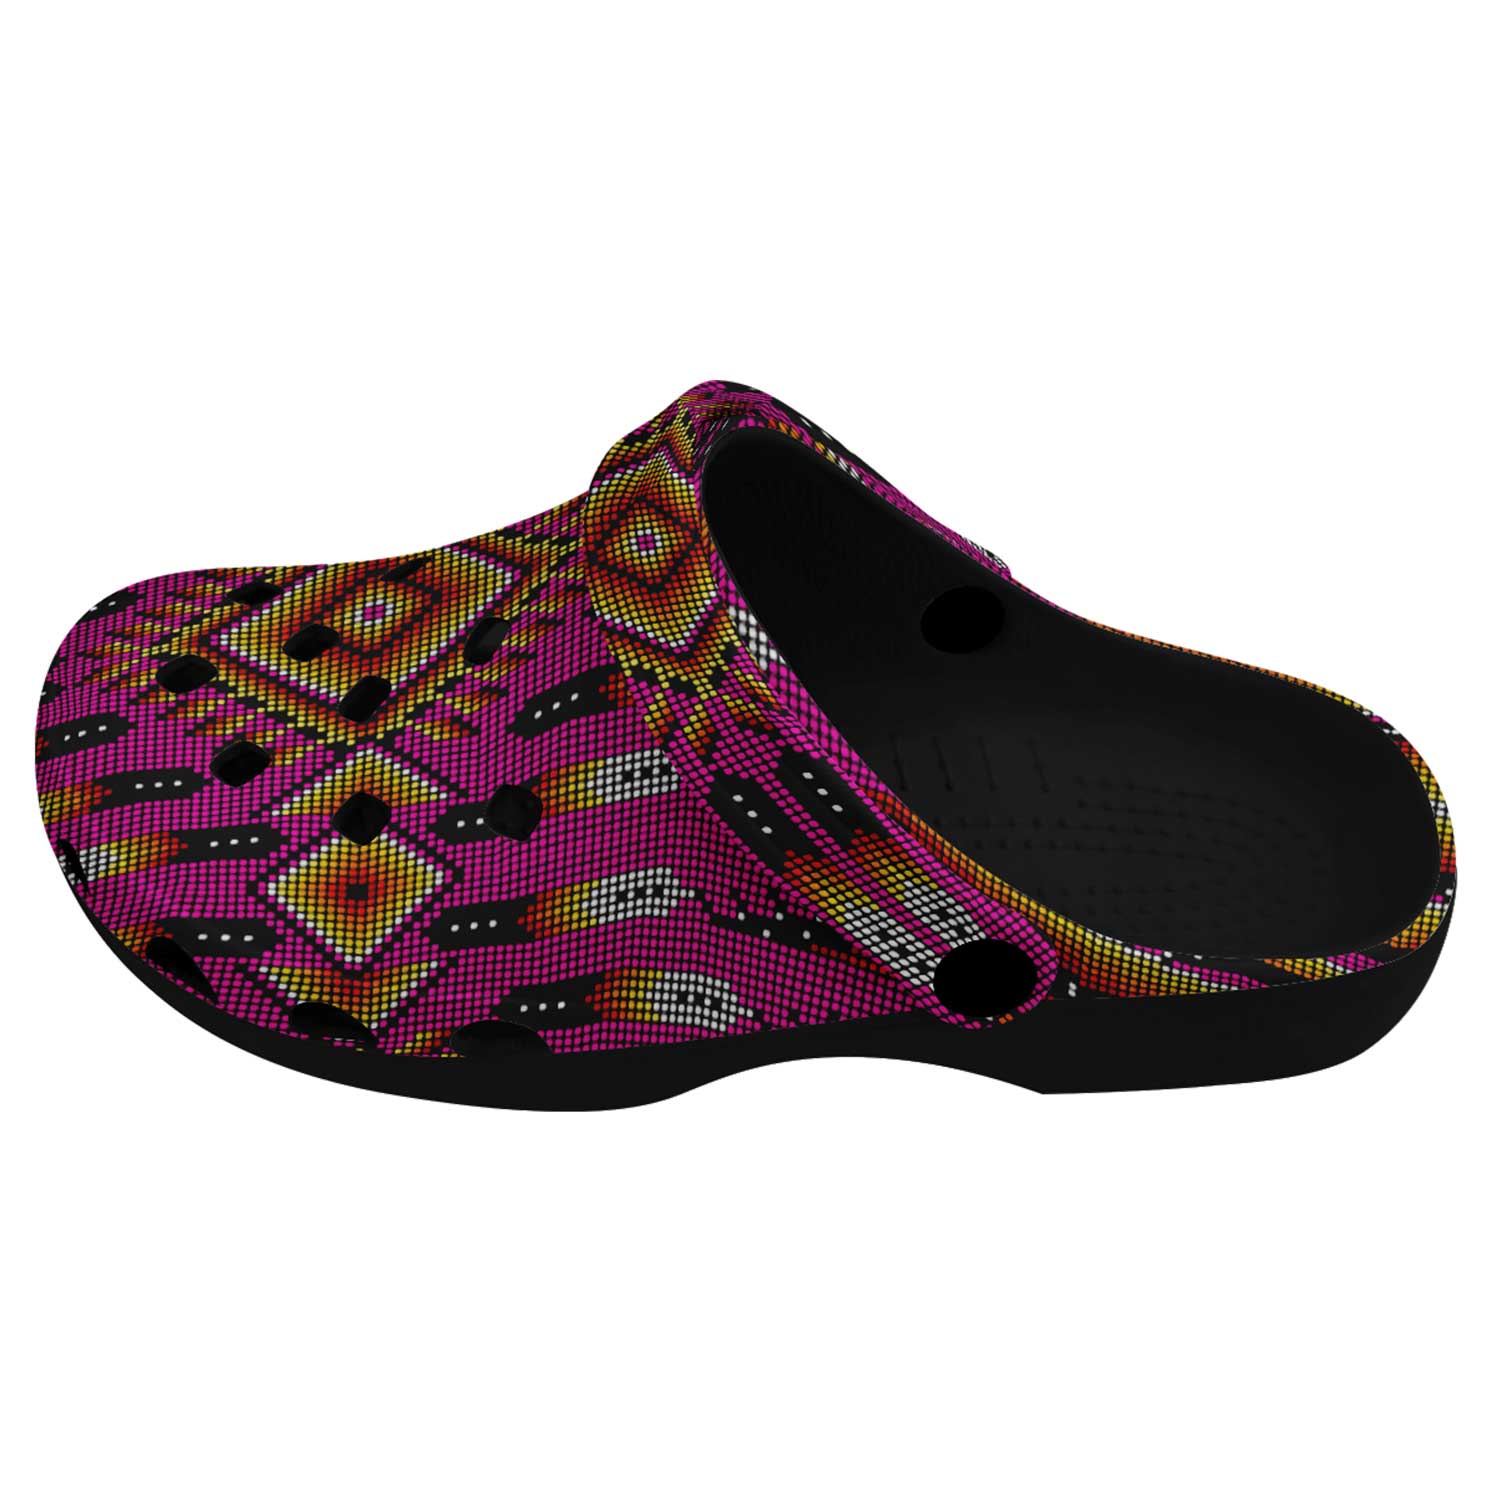 Fire Feather Pink Muddies Unisex Clog Shoes